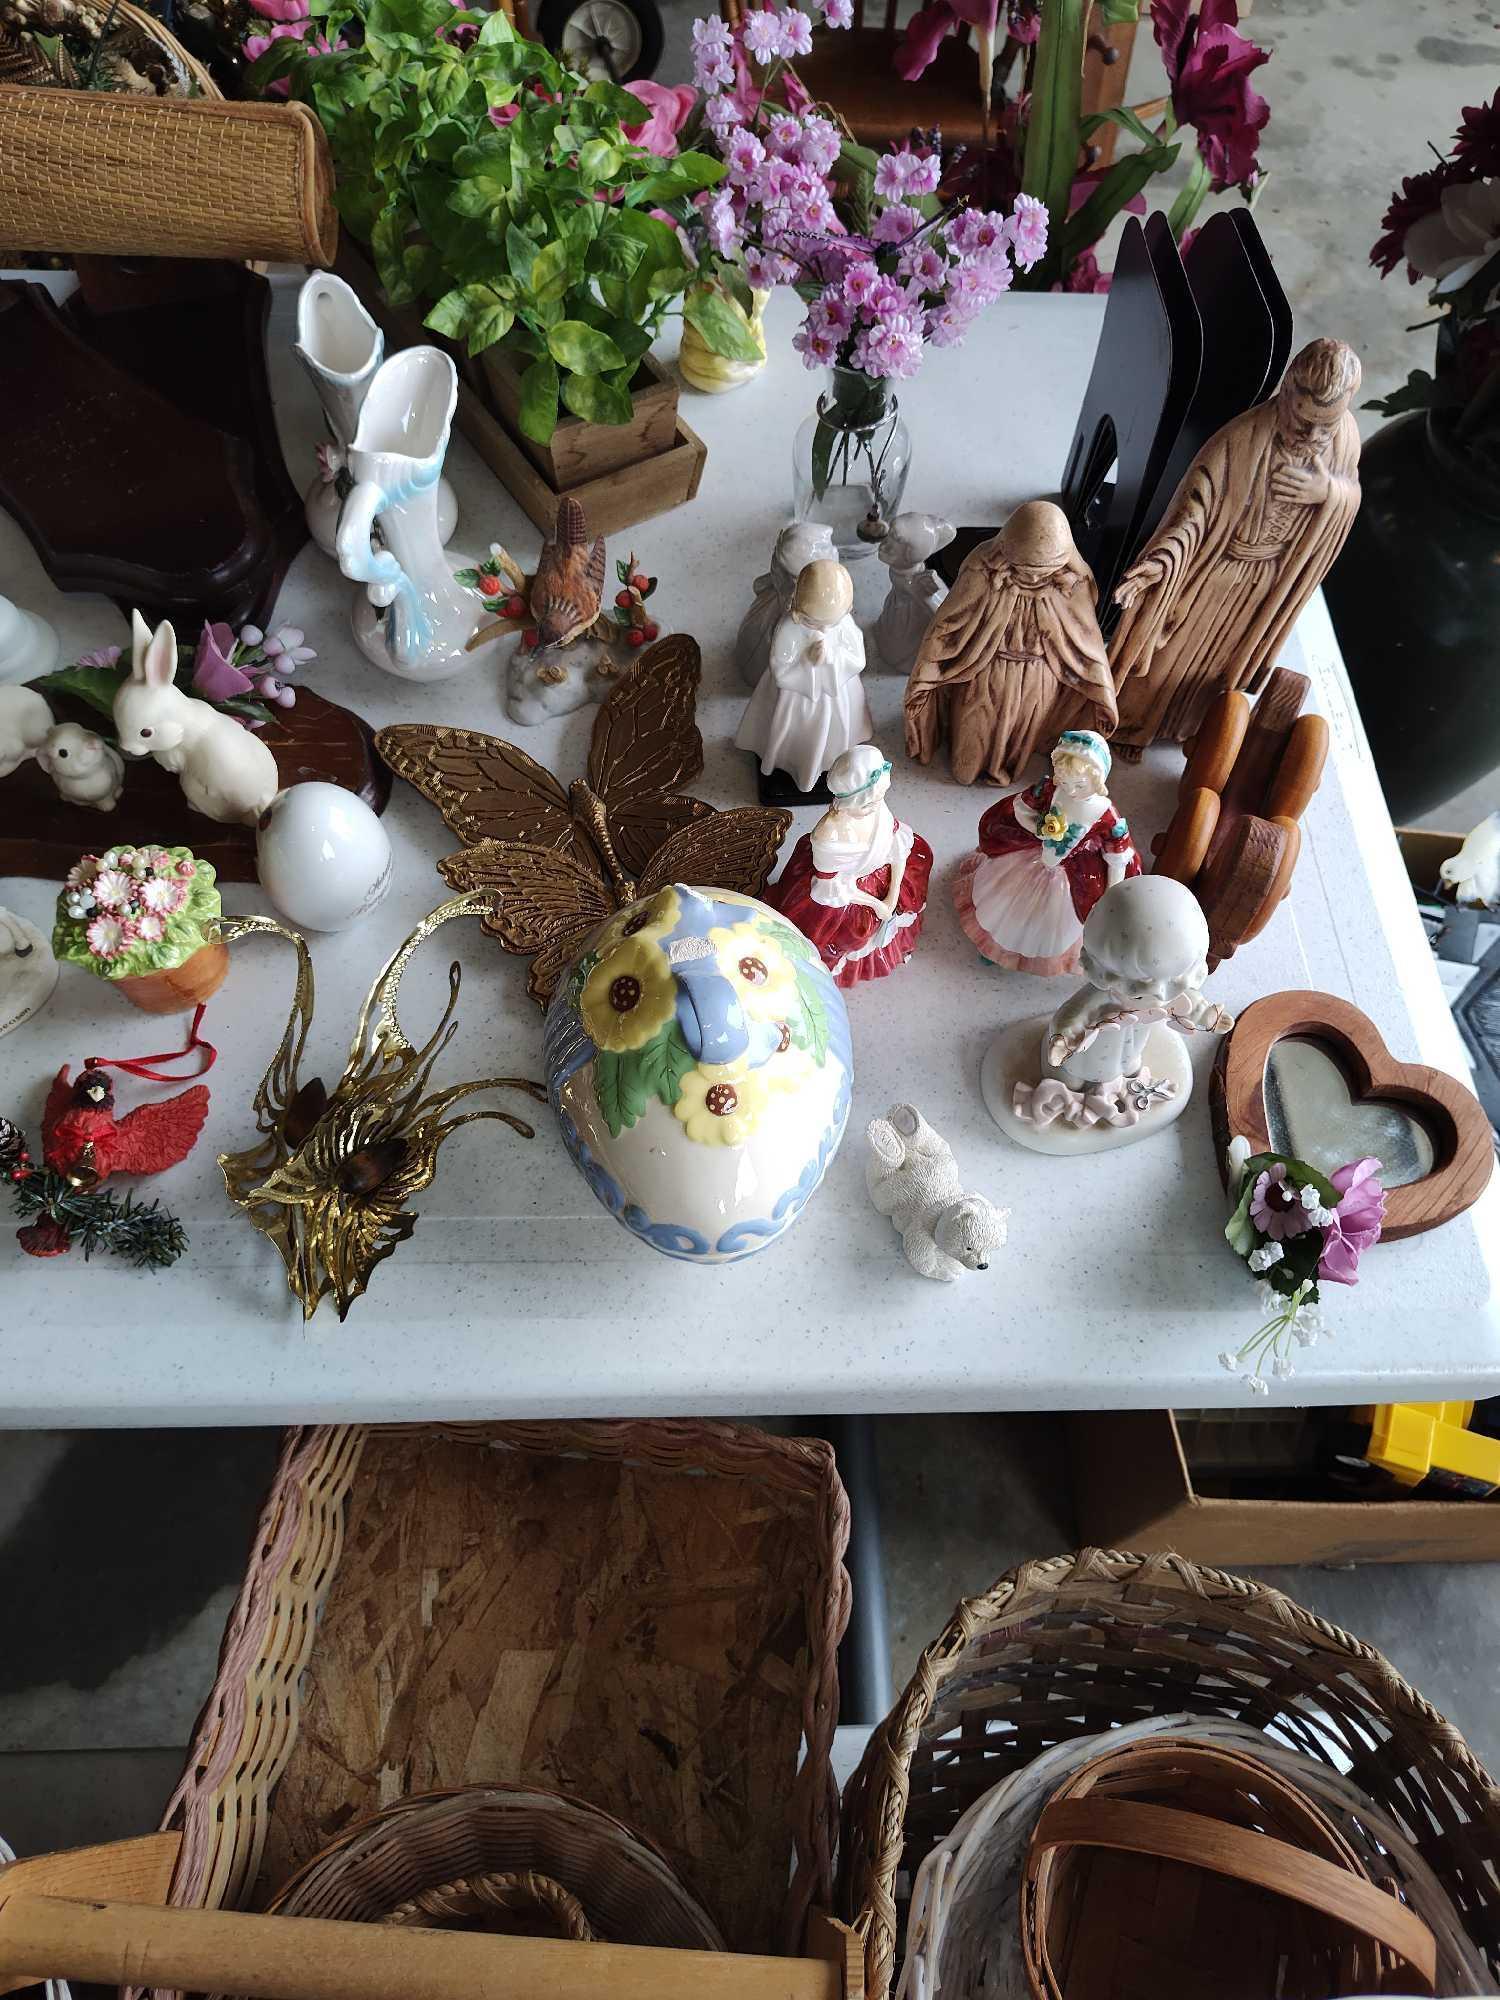 Baskets, Flowers, Toys, Figures